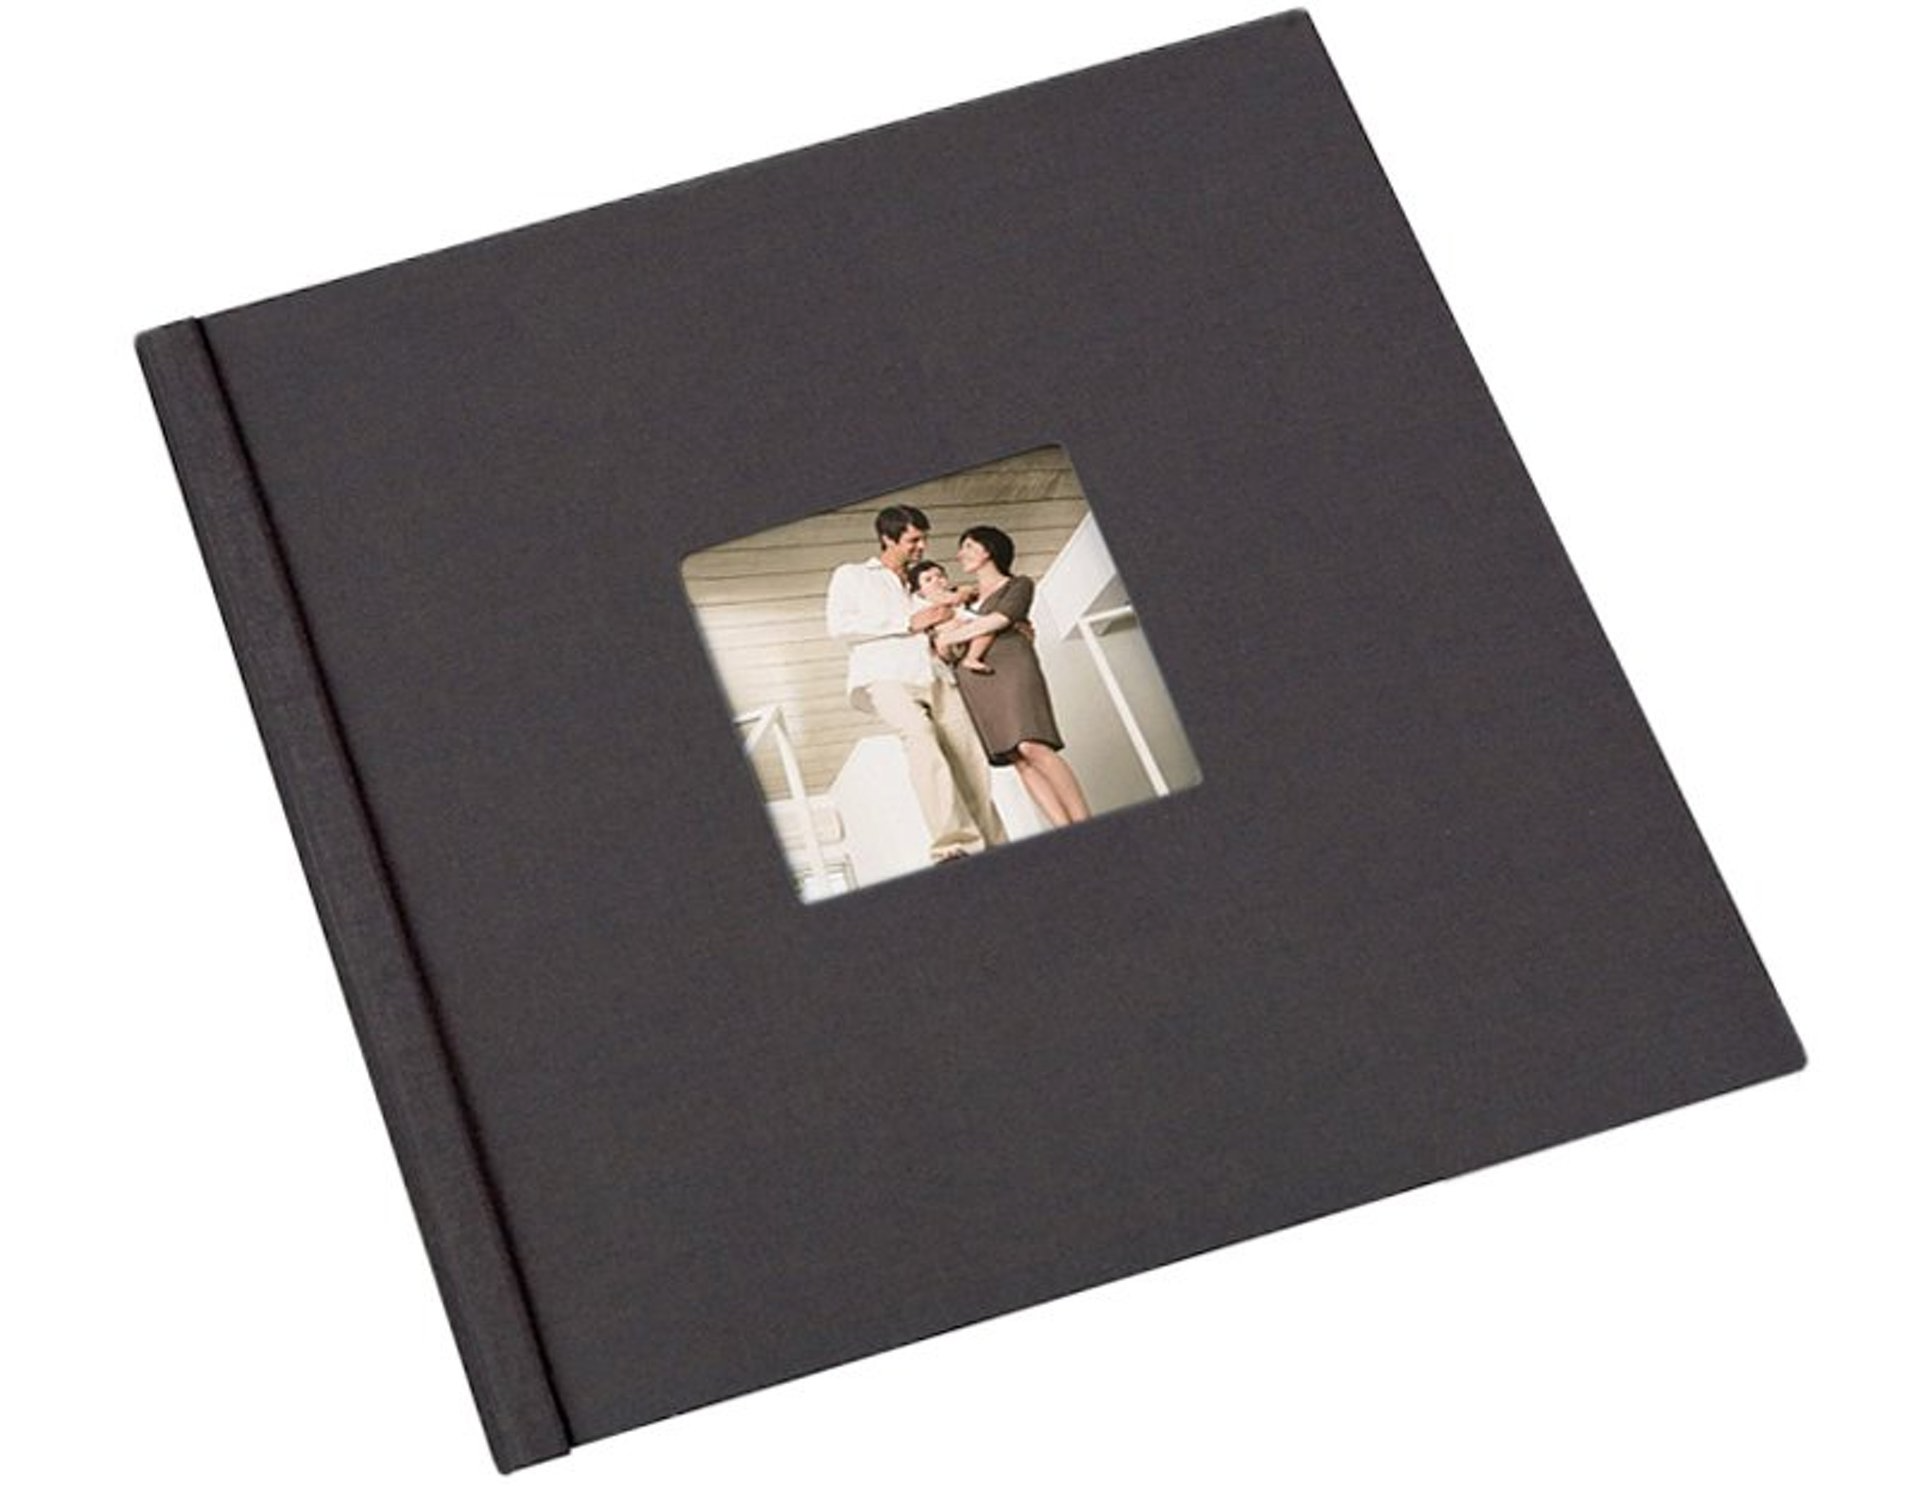 A black photo album with a picture of a man and woman holding a baby